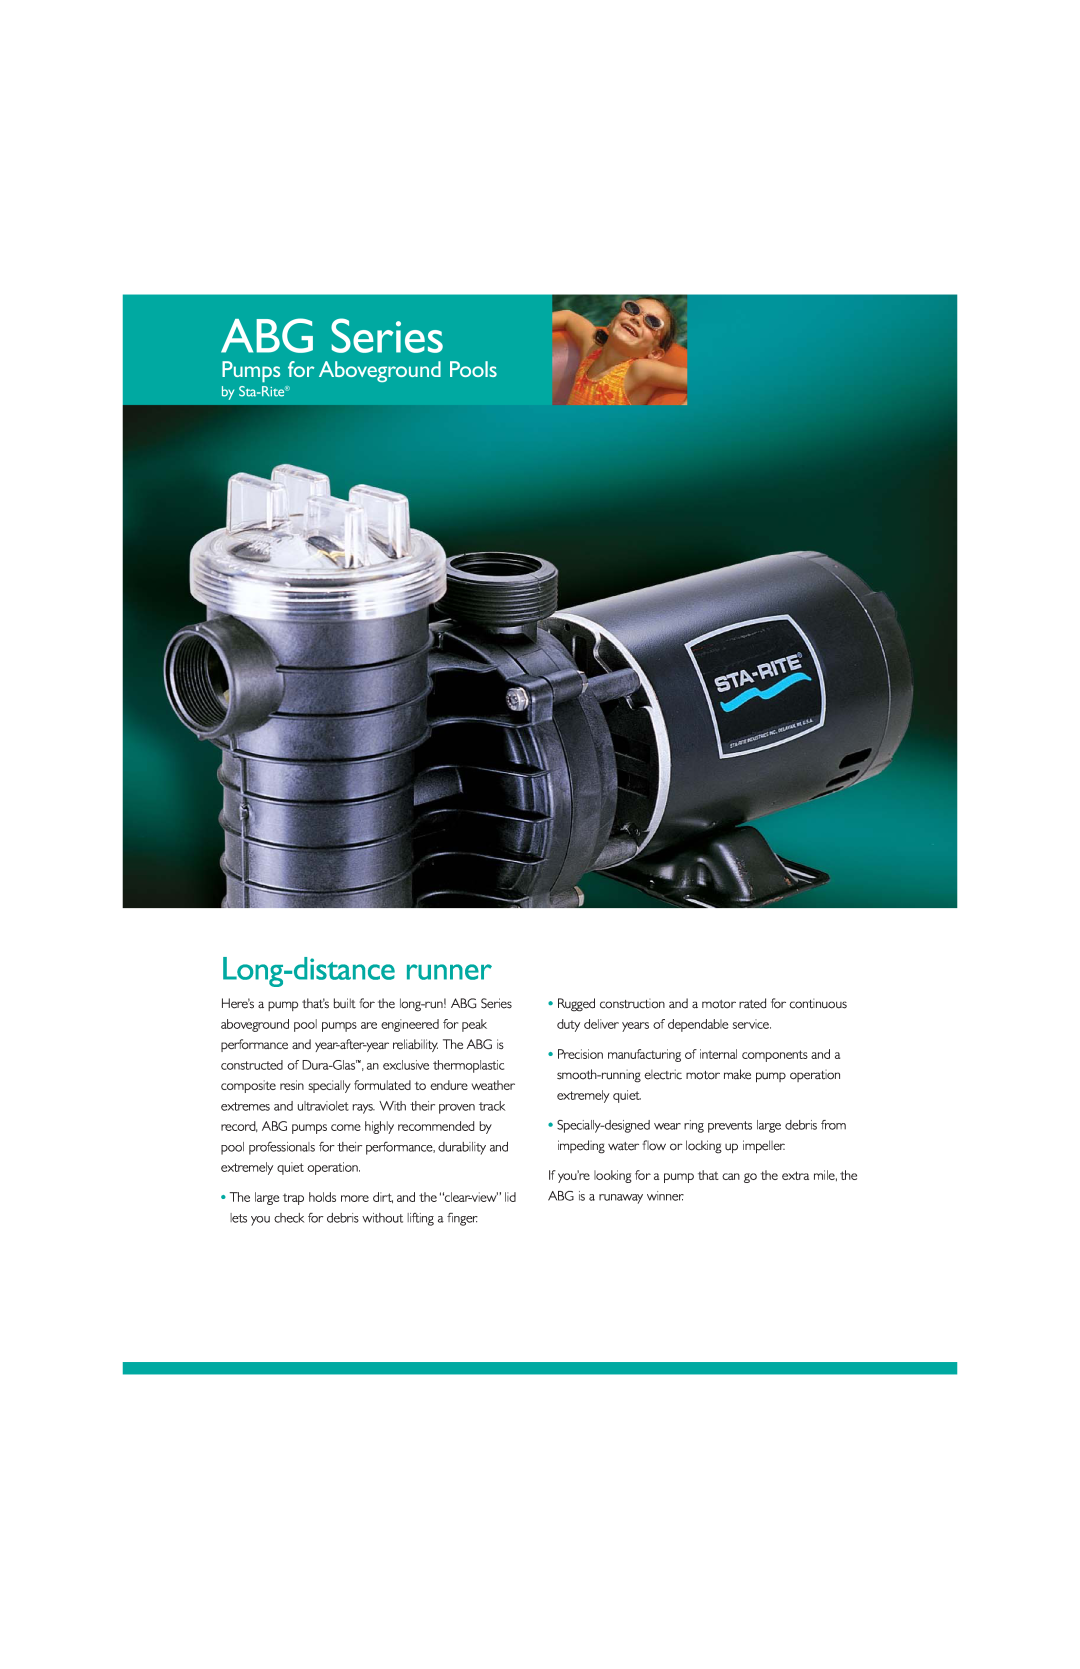 Pentair ABG Series manual Long-distancerunner, Pumps for Aboveground Pools, by Sta-Rite 